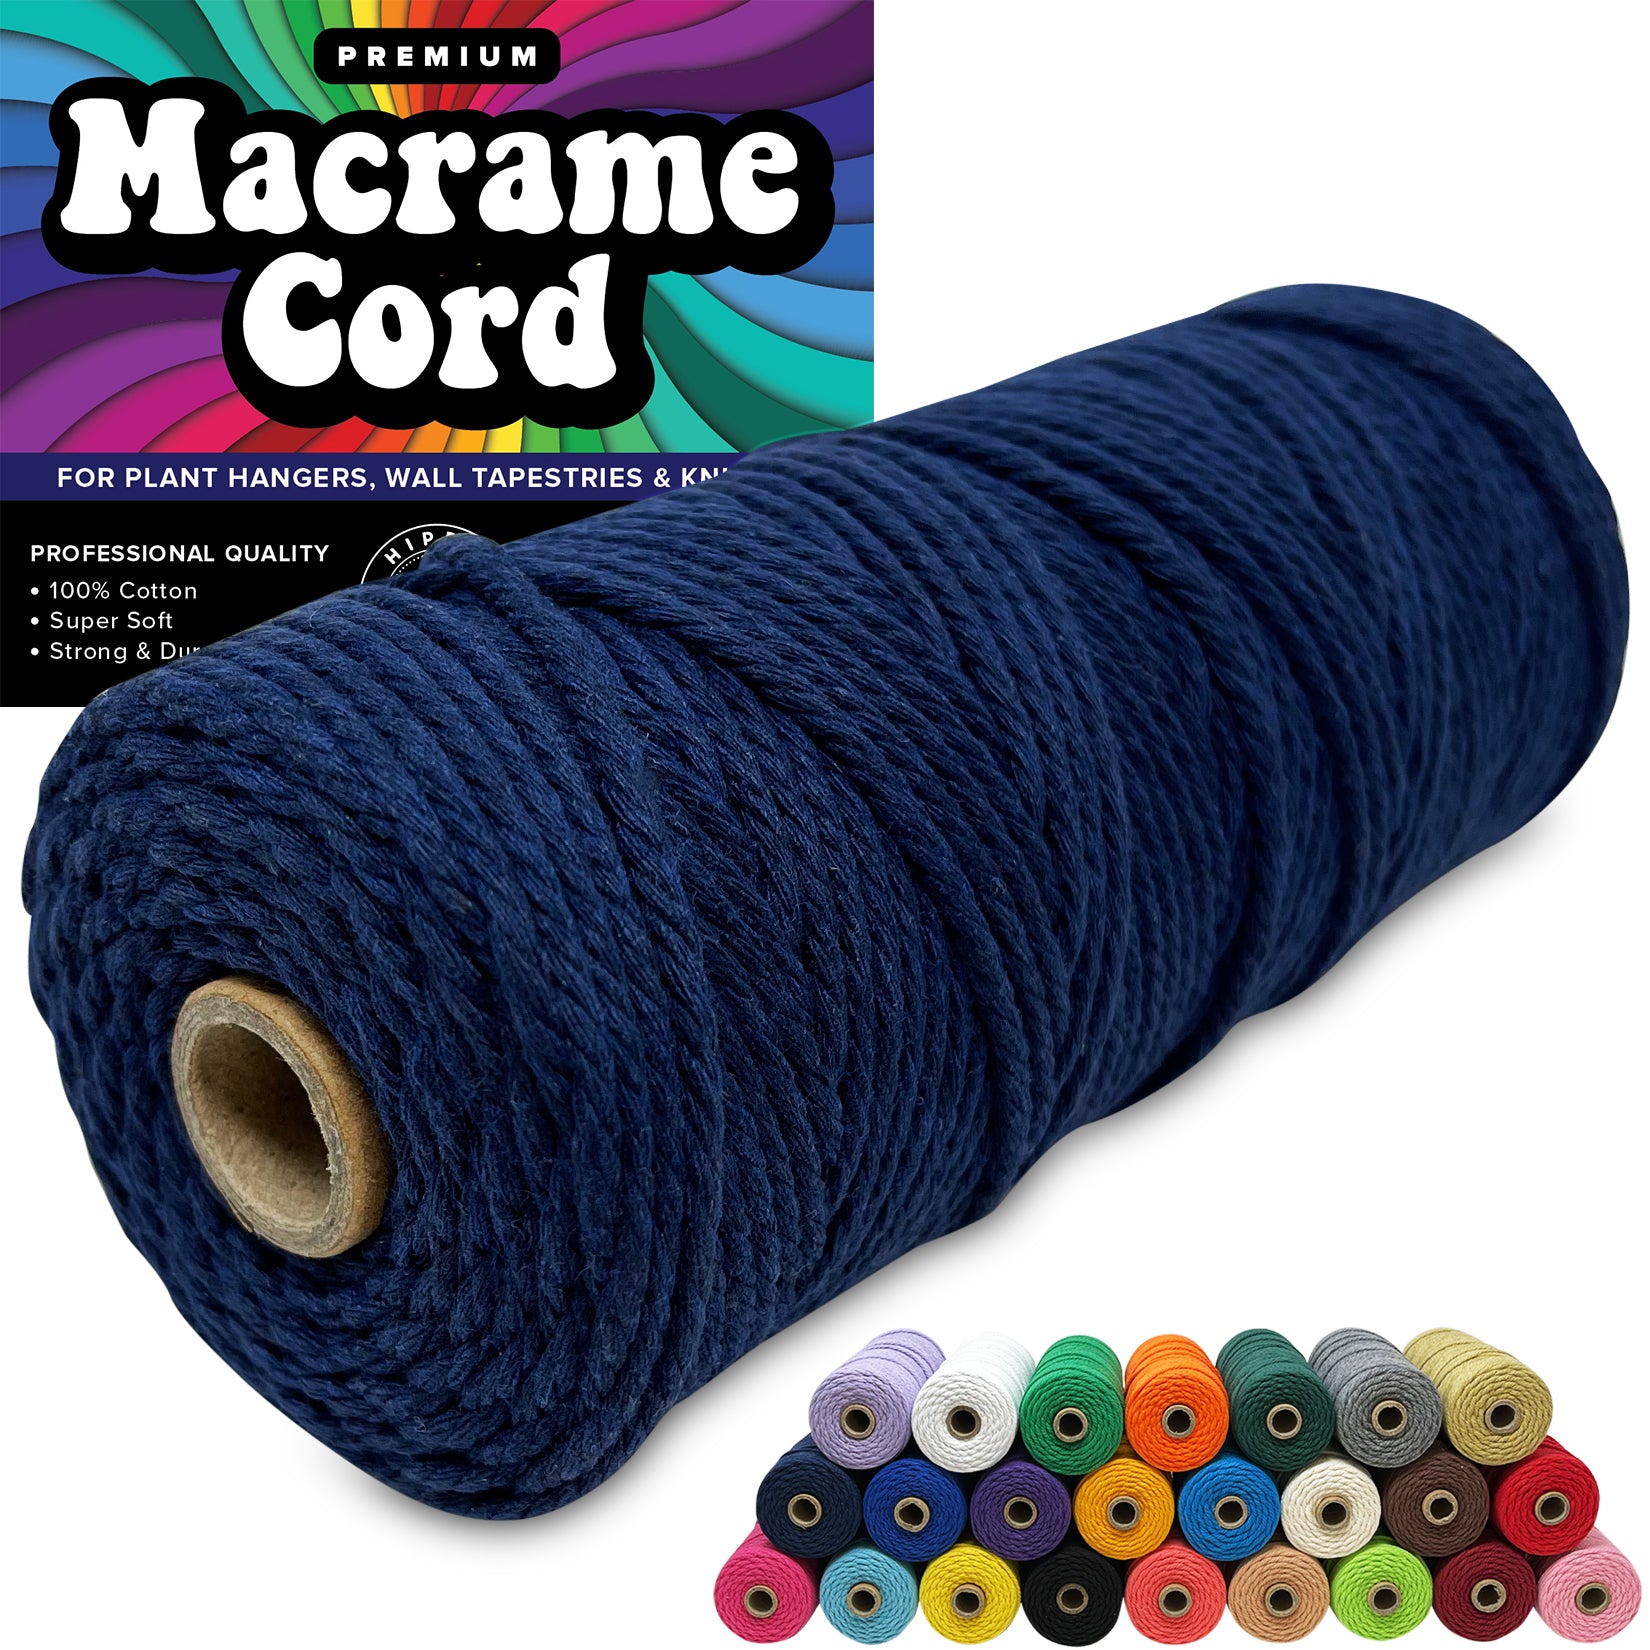 Navy Blue 100% Cotton Cord Rope for Macrame 3mm Natural and Colored Craft String Yarn Materials 325 Feet, Size: Small